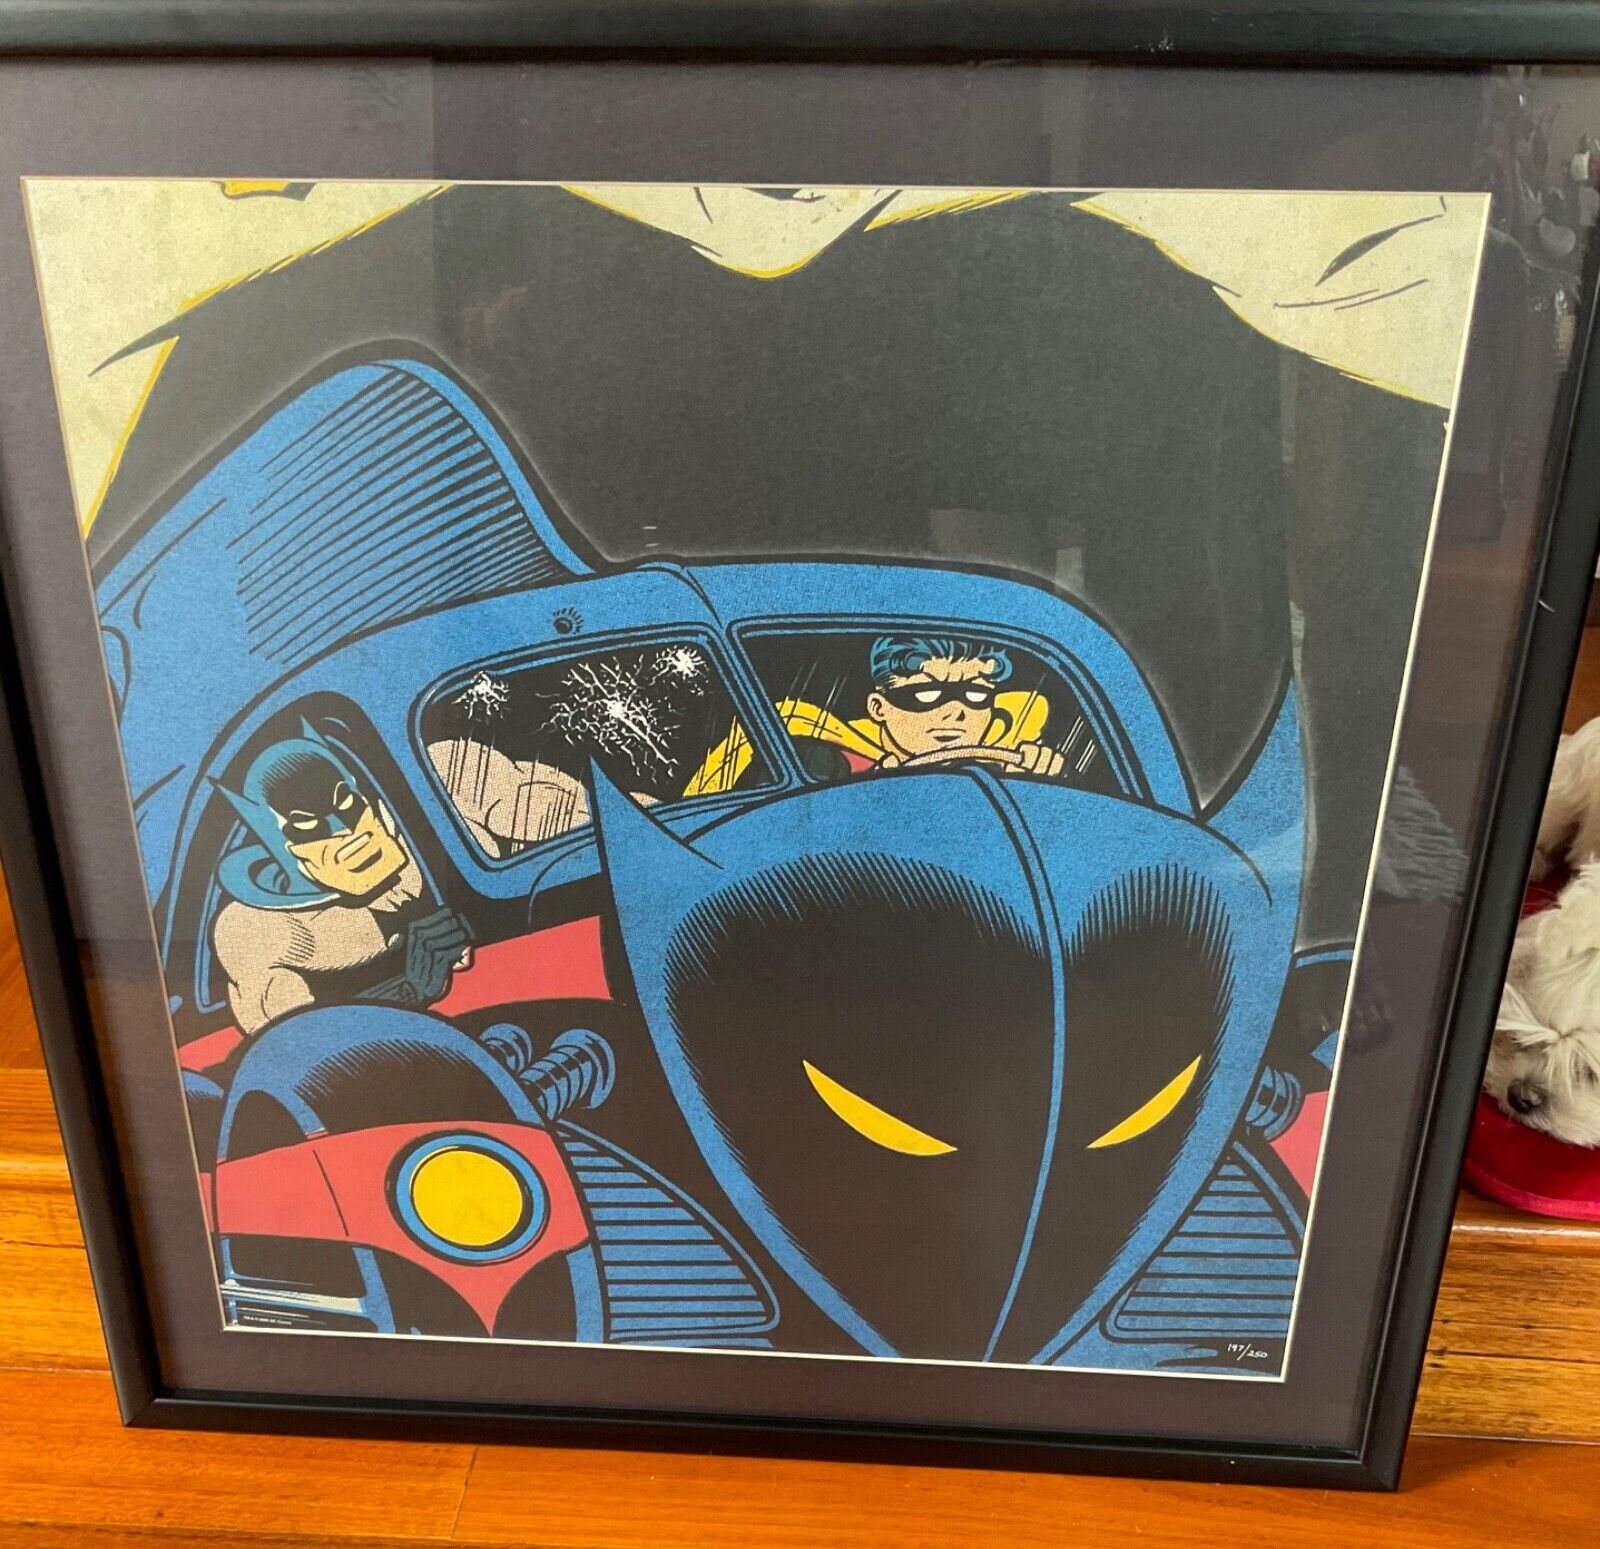 WARNER BROS. LIMITED EDITION FINE ART PRINT BATMAN AND ROBIN: ISSUED 2000 1940'S